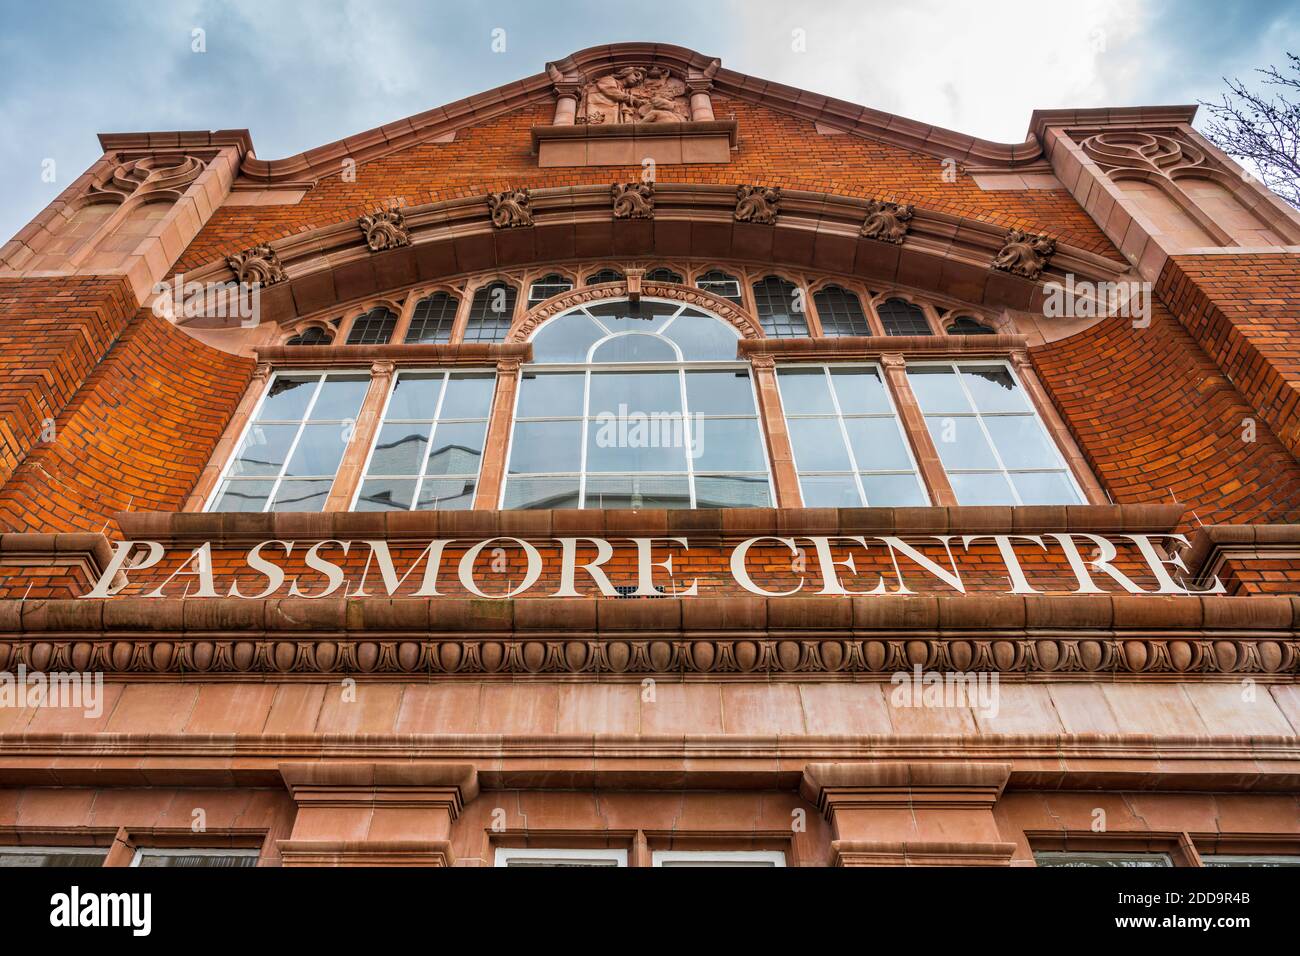 London South Bank University LSBU Passmore Centre - created in 2018 to support apprenticeships, skills and training in the borough of Southwark. Stock Photo